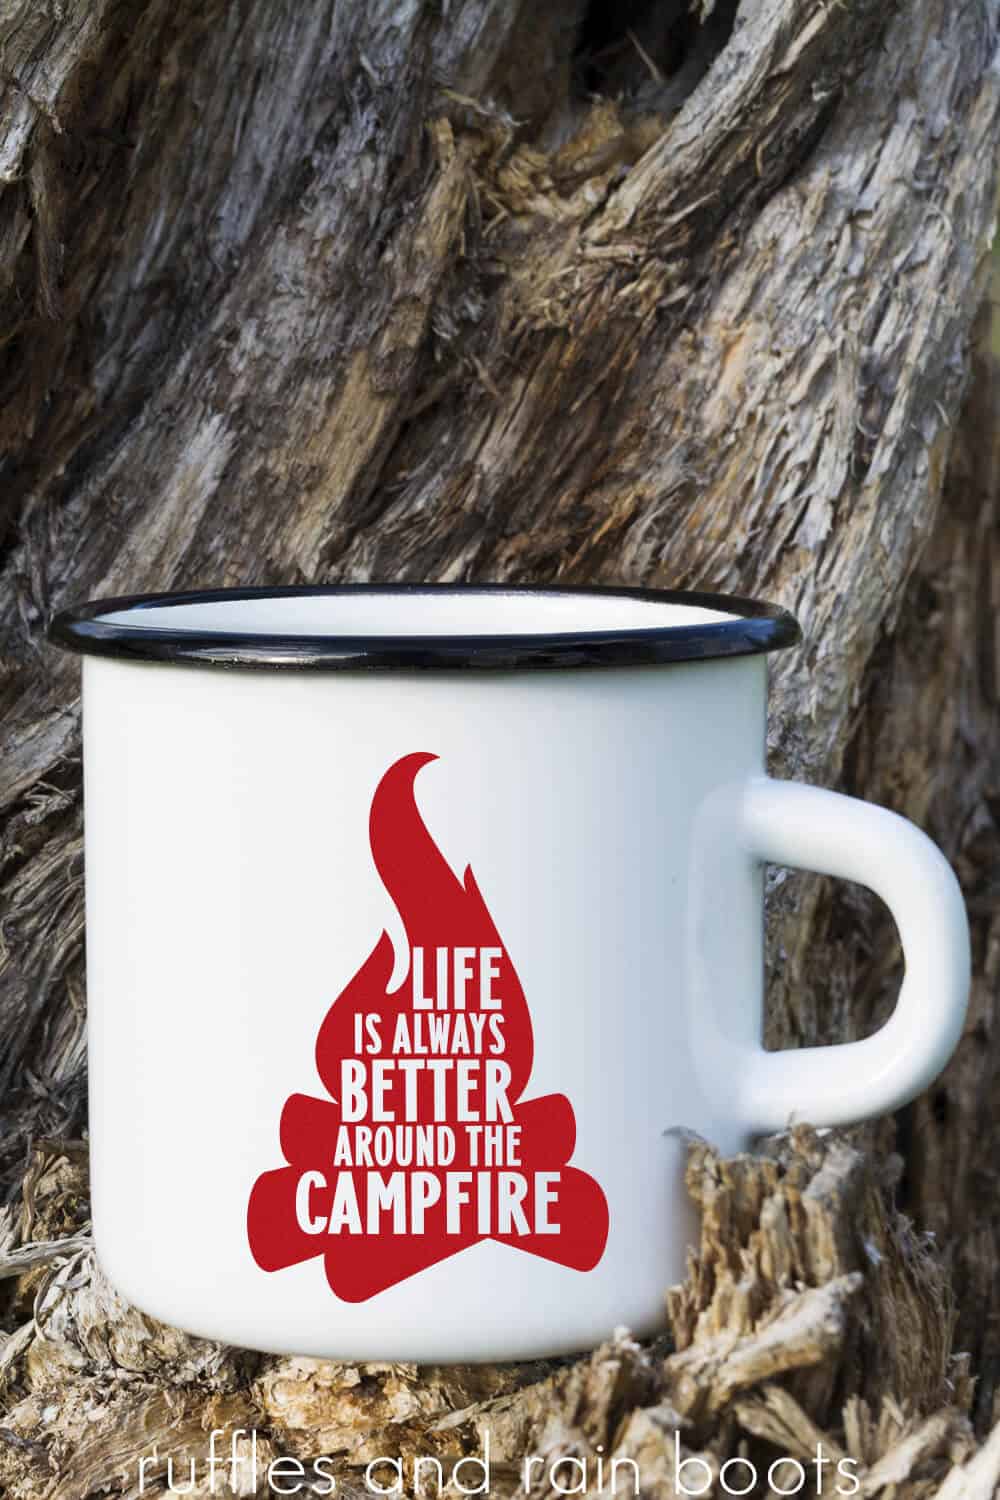 Vertical image of a white enamel mug with black rim in front of a stump with red campfire SVG.